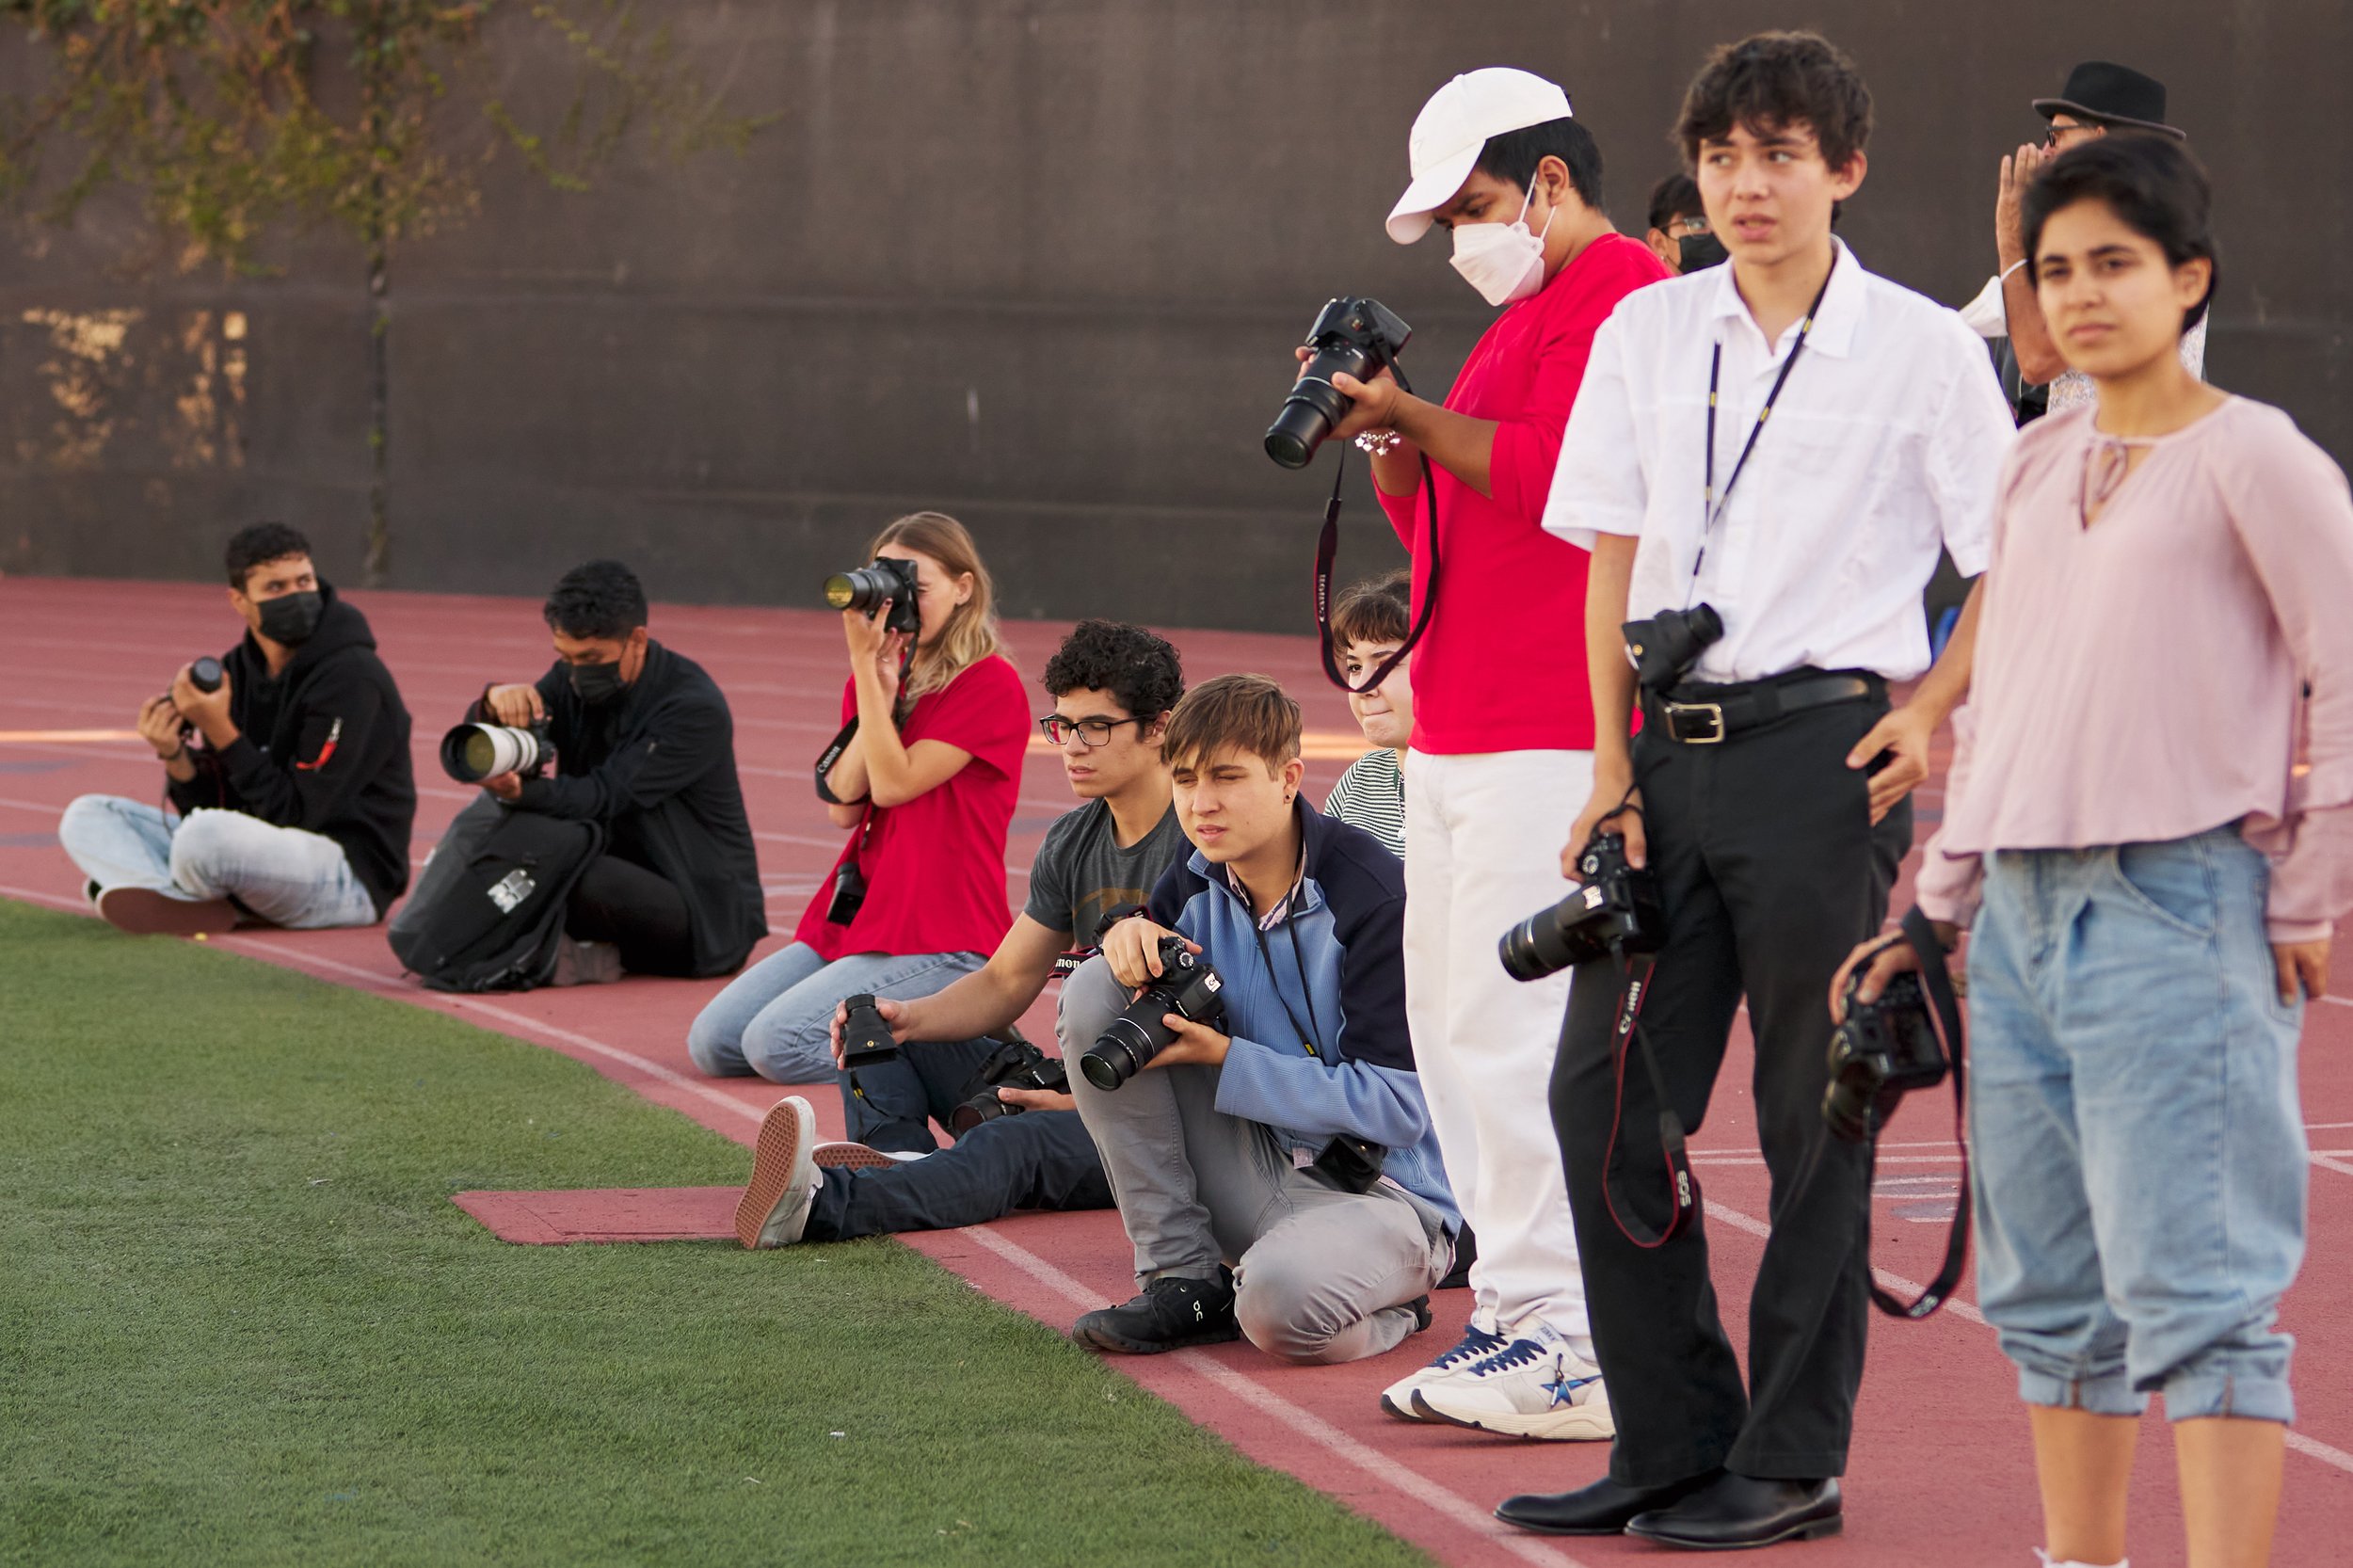  Students from Ed Mangus' Introduction to Photography class visit the stadium to photograph the men's soccer match between the Santa Monica College Corsairs and the Moorpark College Raiders on Tuesday, Oct. 25, 2022, at Corsair Field in Santa Monica,